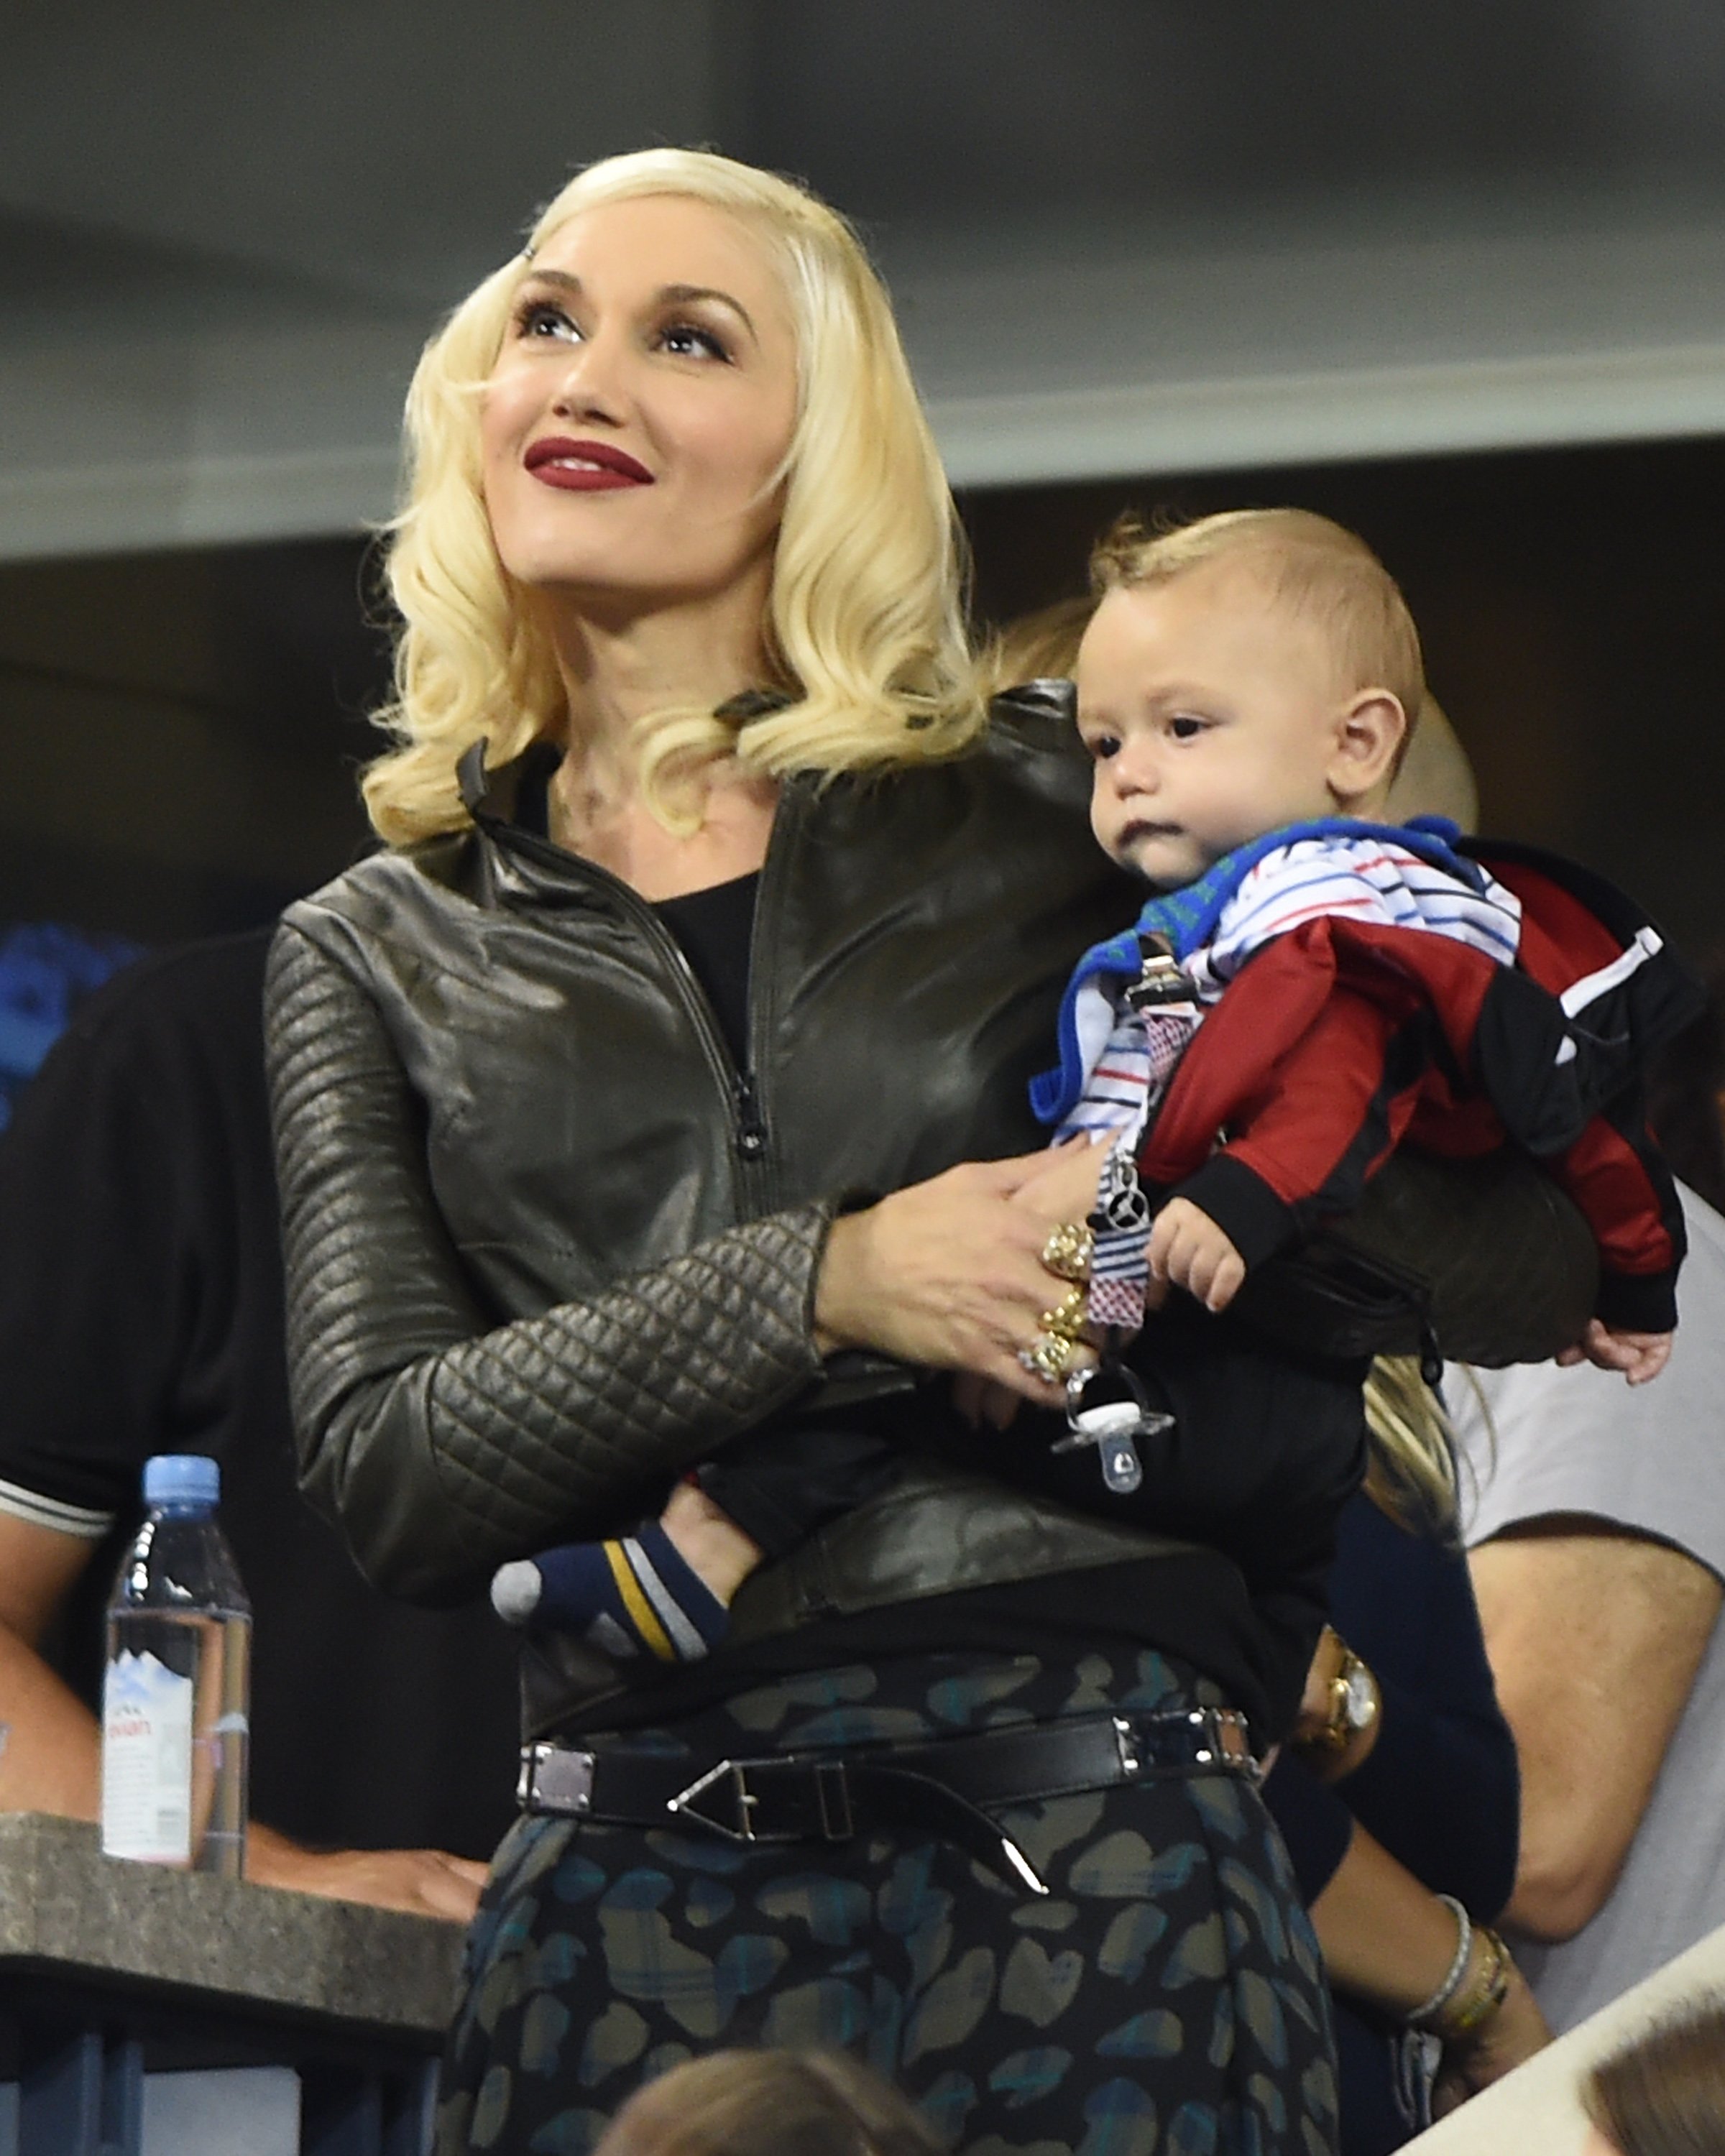 Gwen Stefani and Apollo Bowie Rossdale at the US Open on September 4, 2014, in New York City | Source: Getty Images